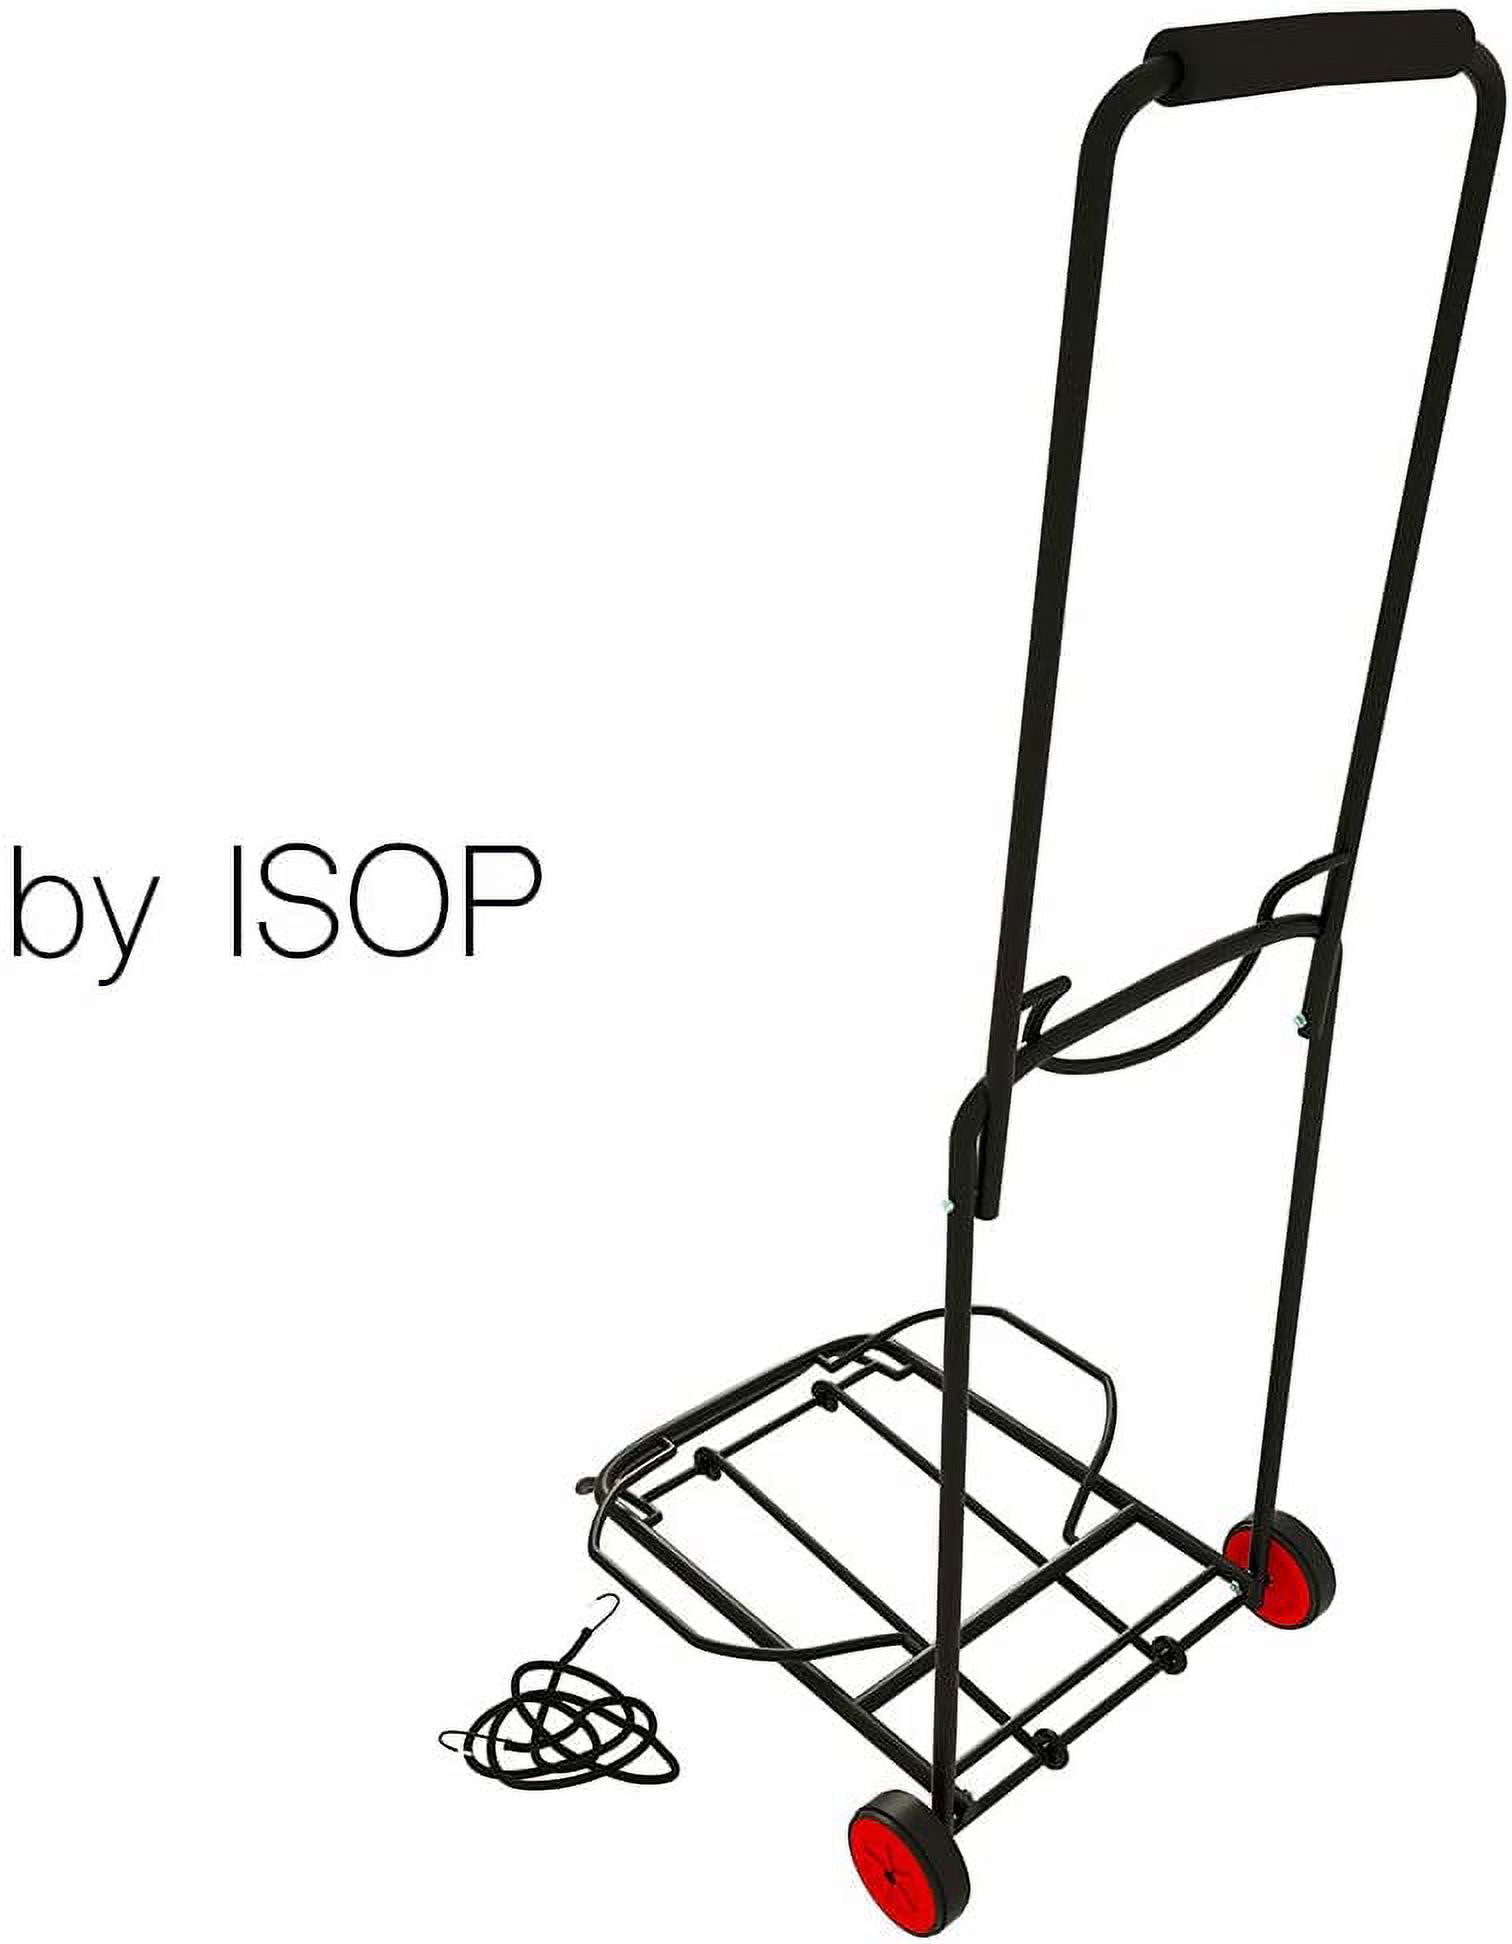 ISOP Folding Dolly Cart - Hand Truck - Compact Lightest Trolley - 2 Wheels, 80 lb, Elastic Cord Included - image 4 of 8